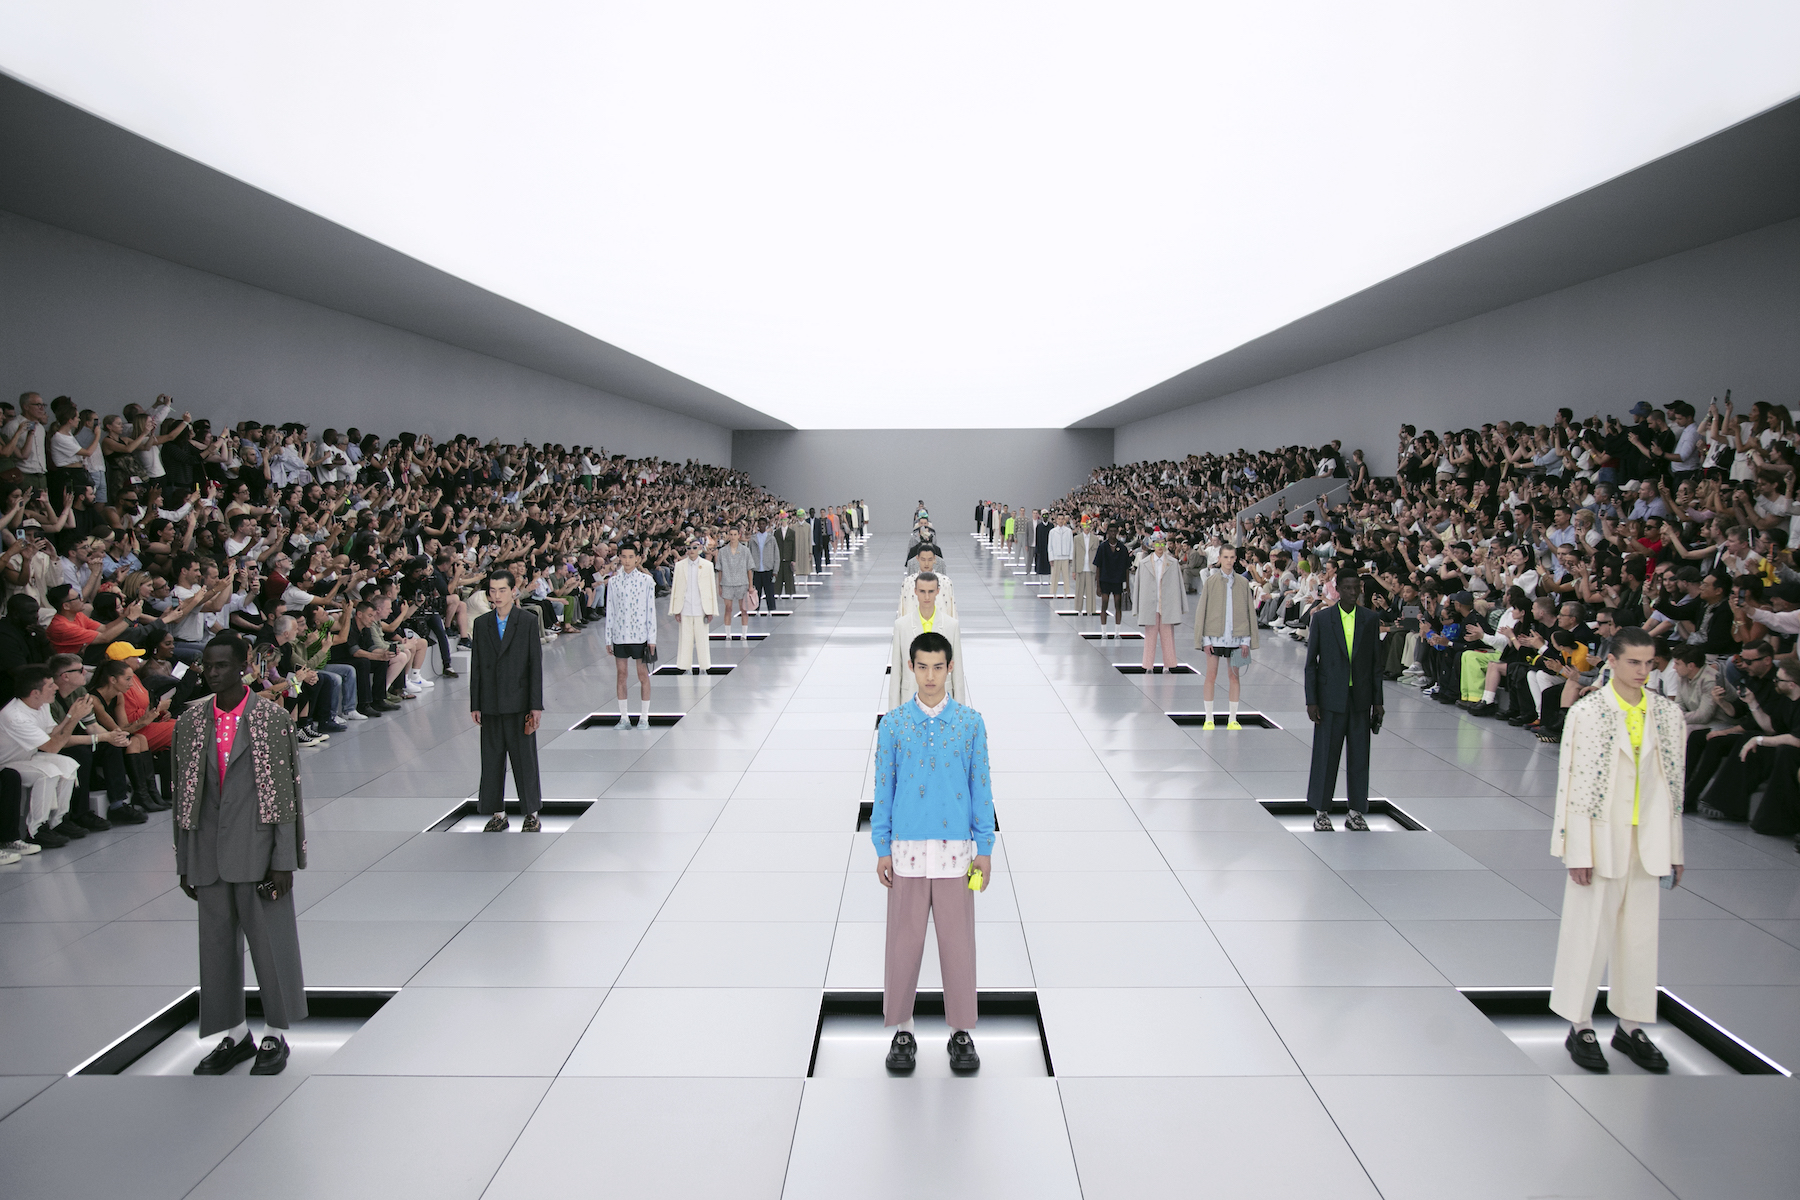 Five years on, Kim Jones is still staging epic shows for Dior Men